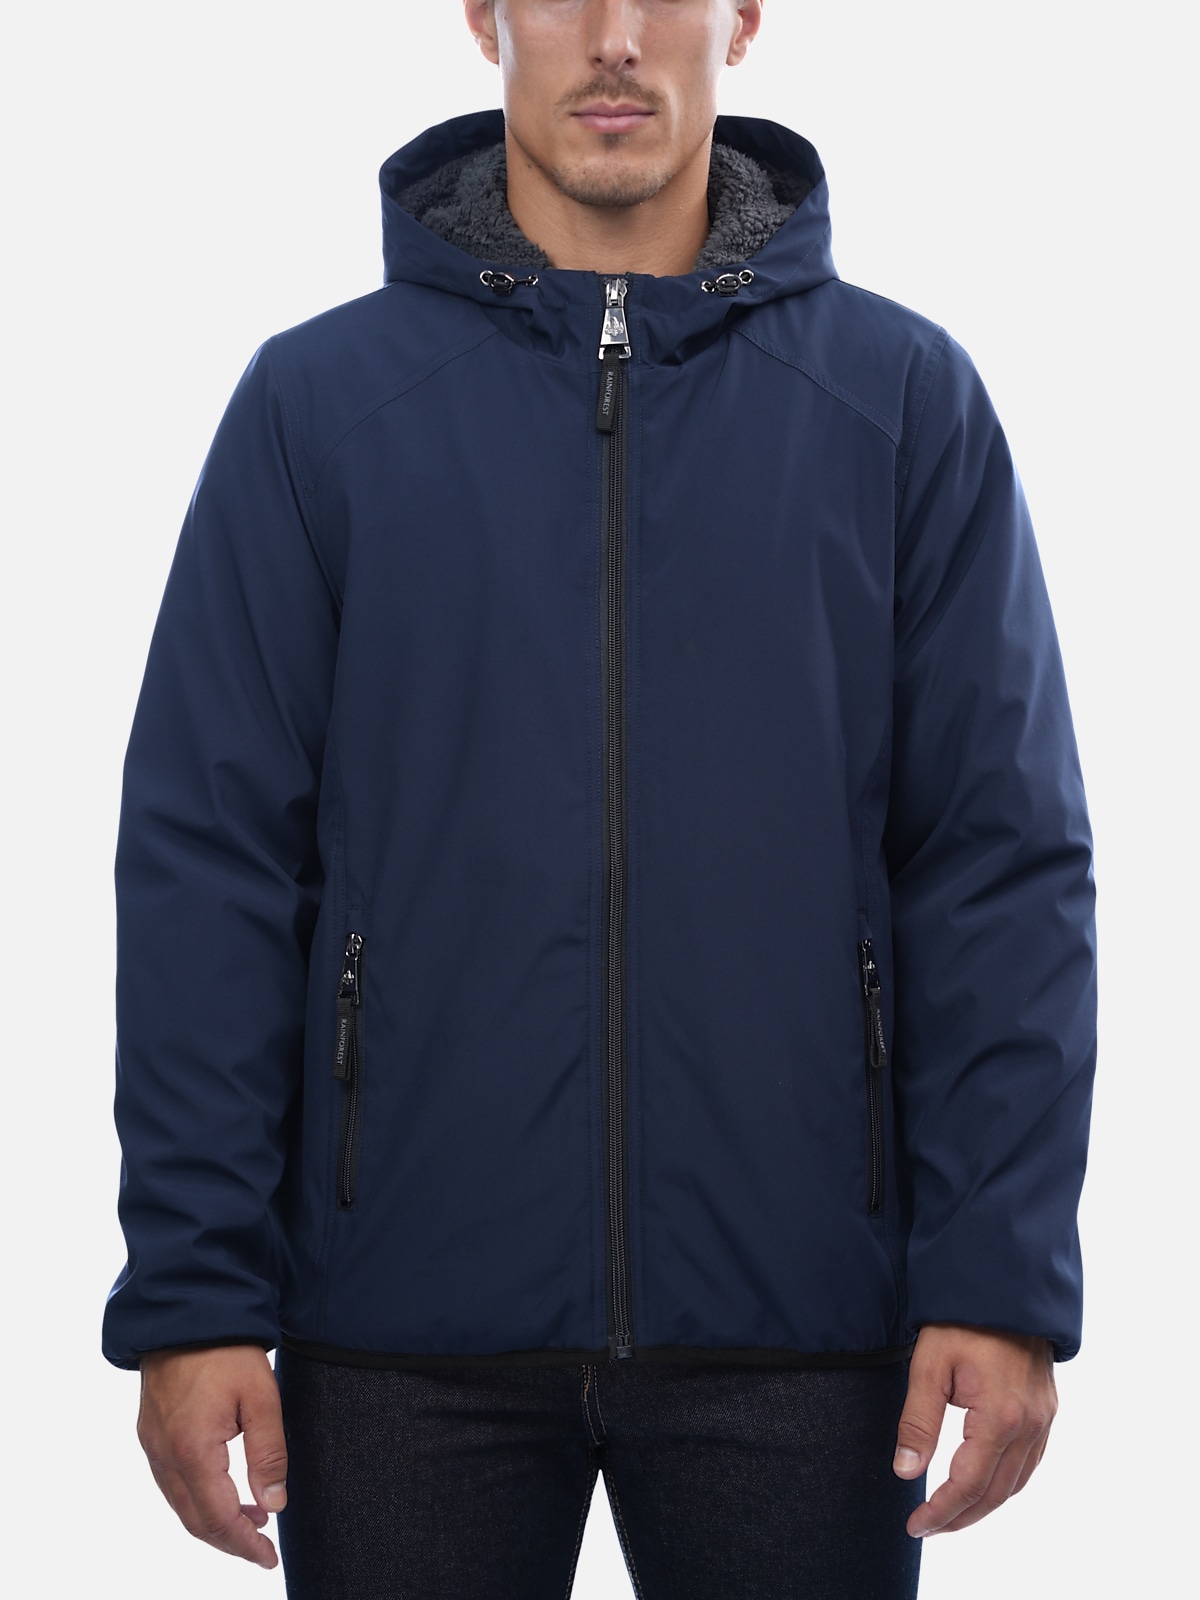 Rainforest Modern Fit Softshell Jacket | All Clearance $39.99| Men's ...